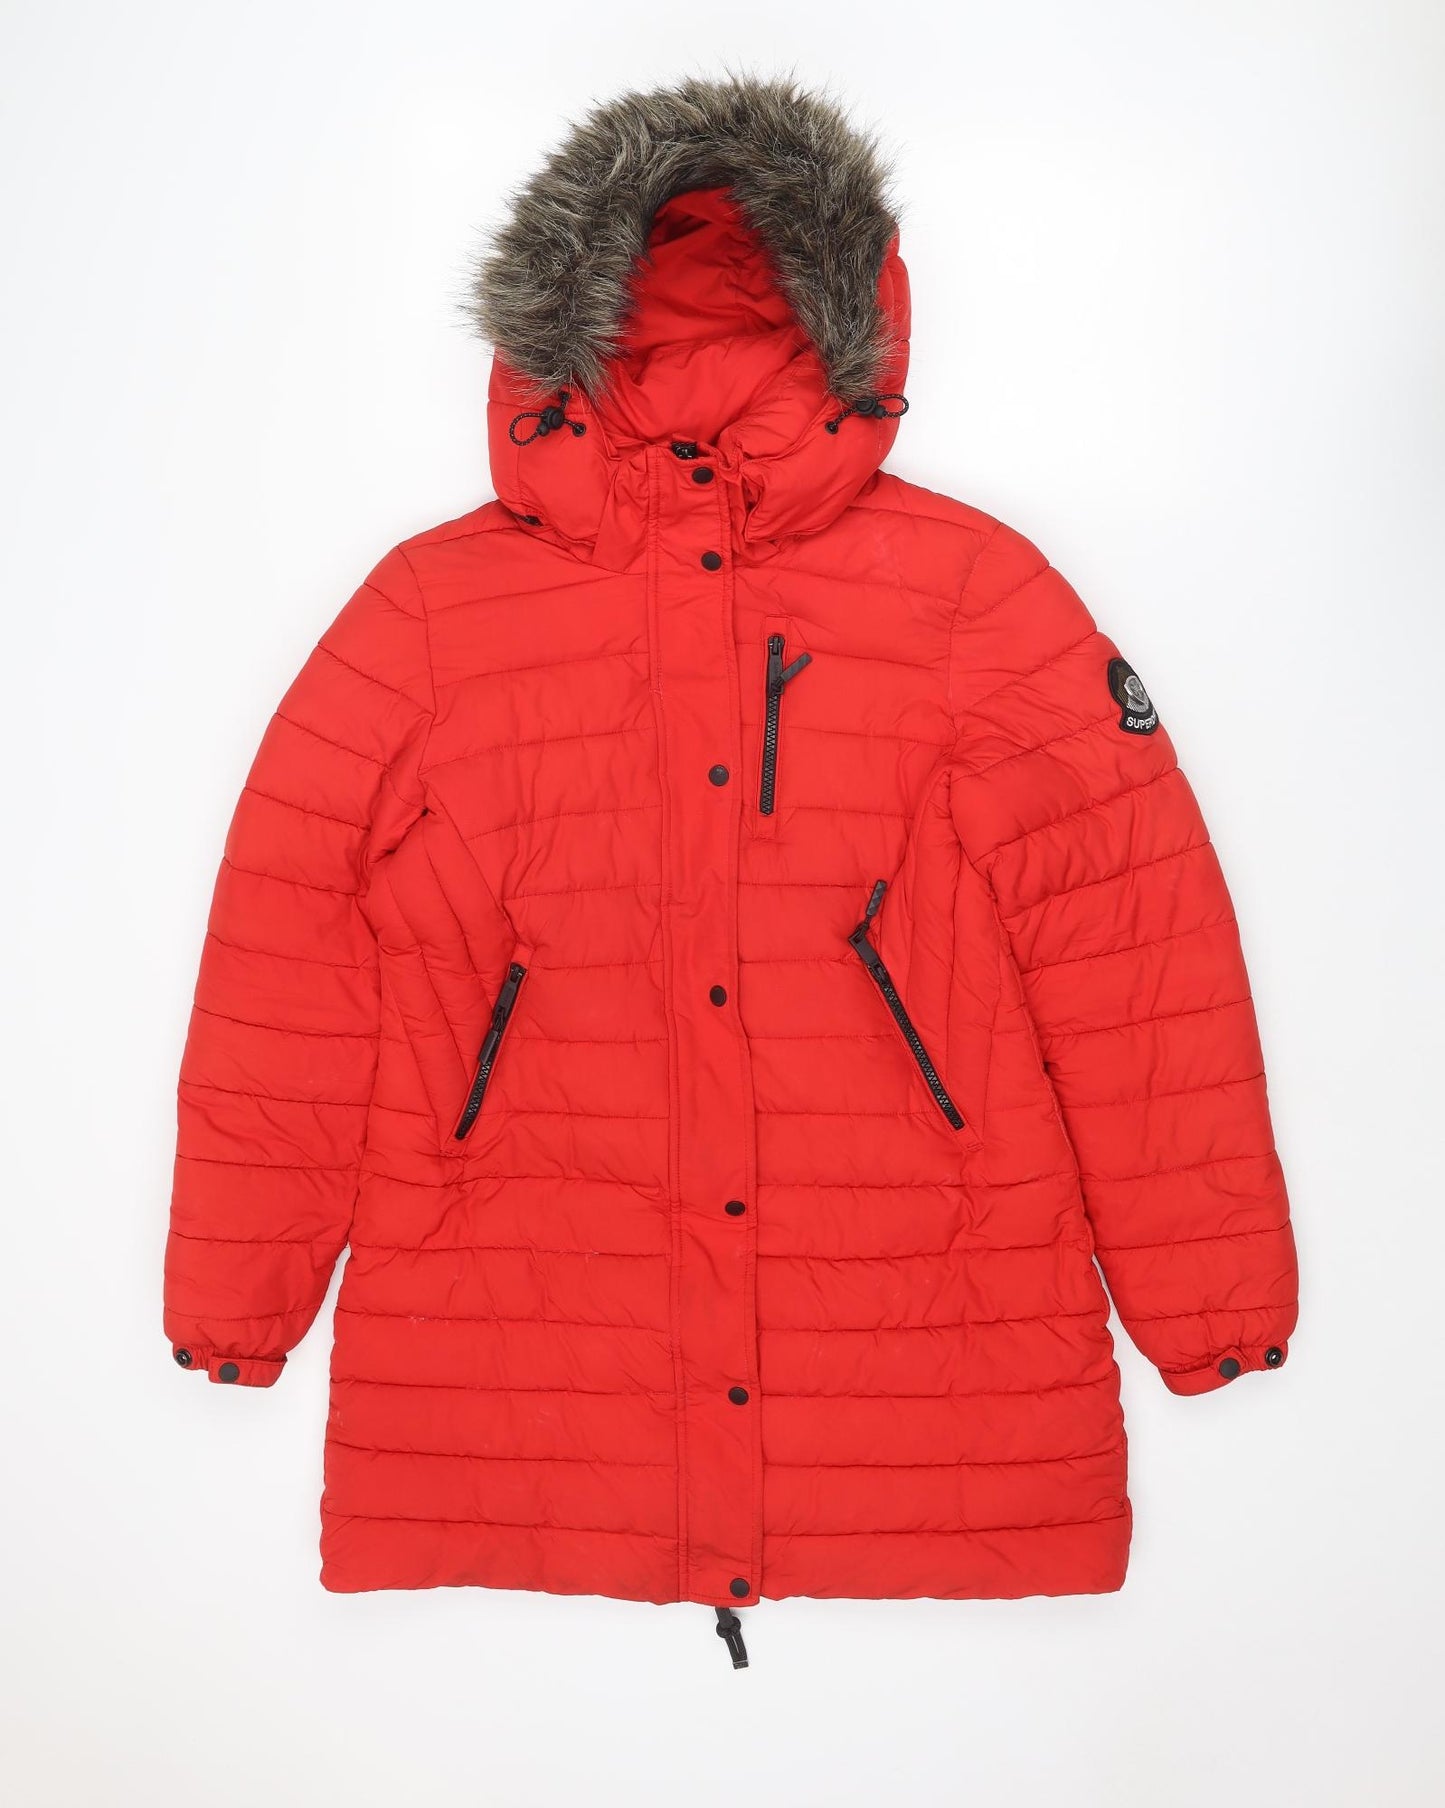 Superdry Womens Red Quilted Coat Size 12 Zip